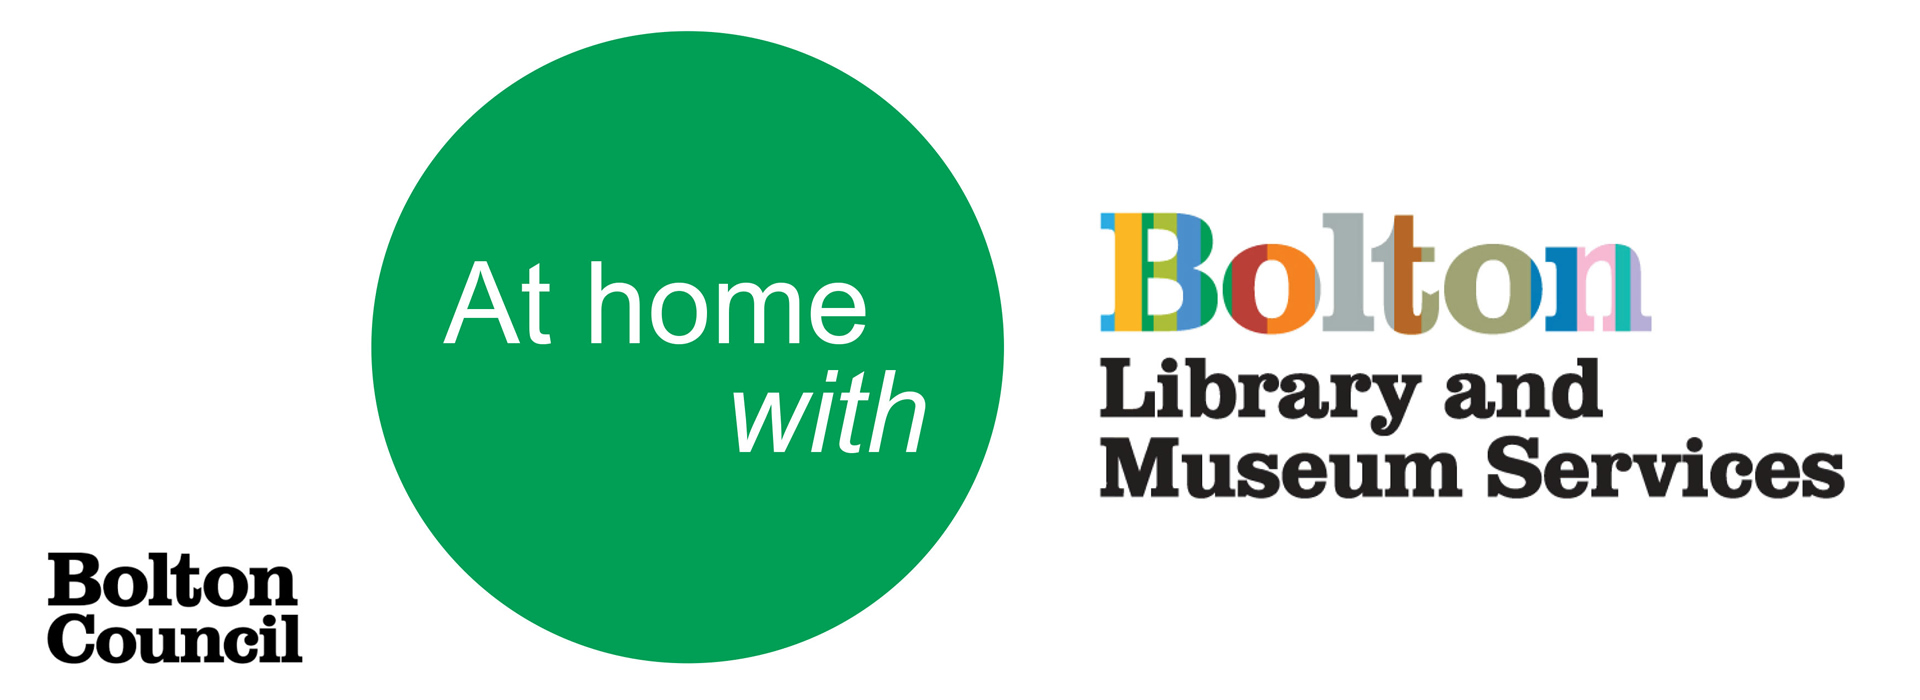 At home with Bolton Library and Museum Service